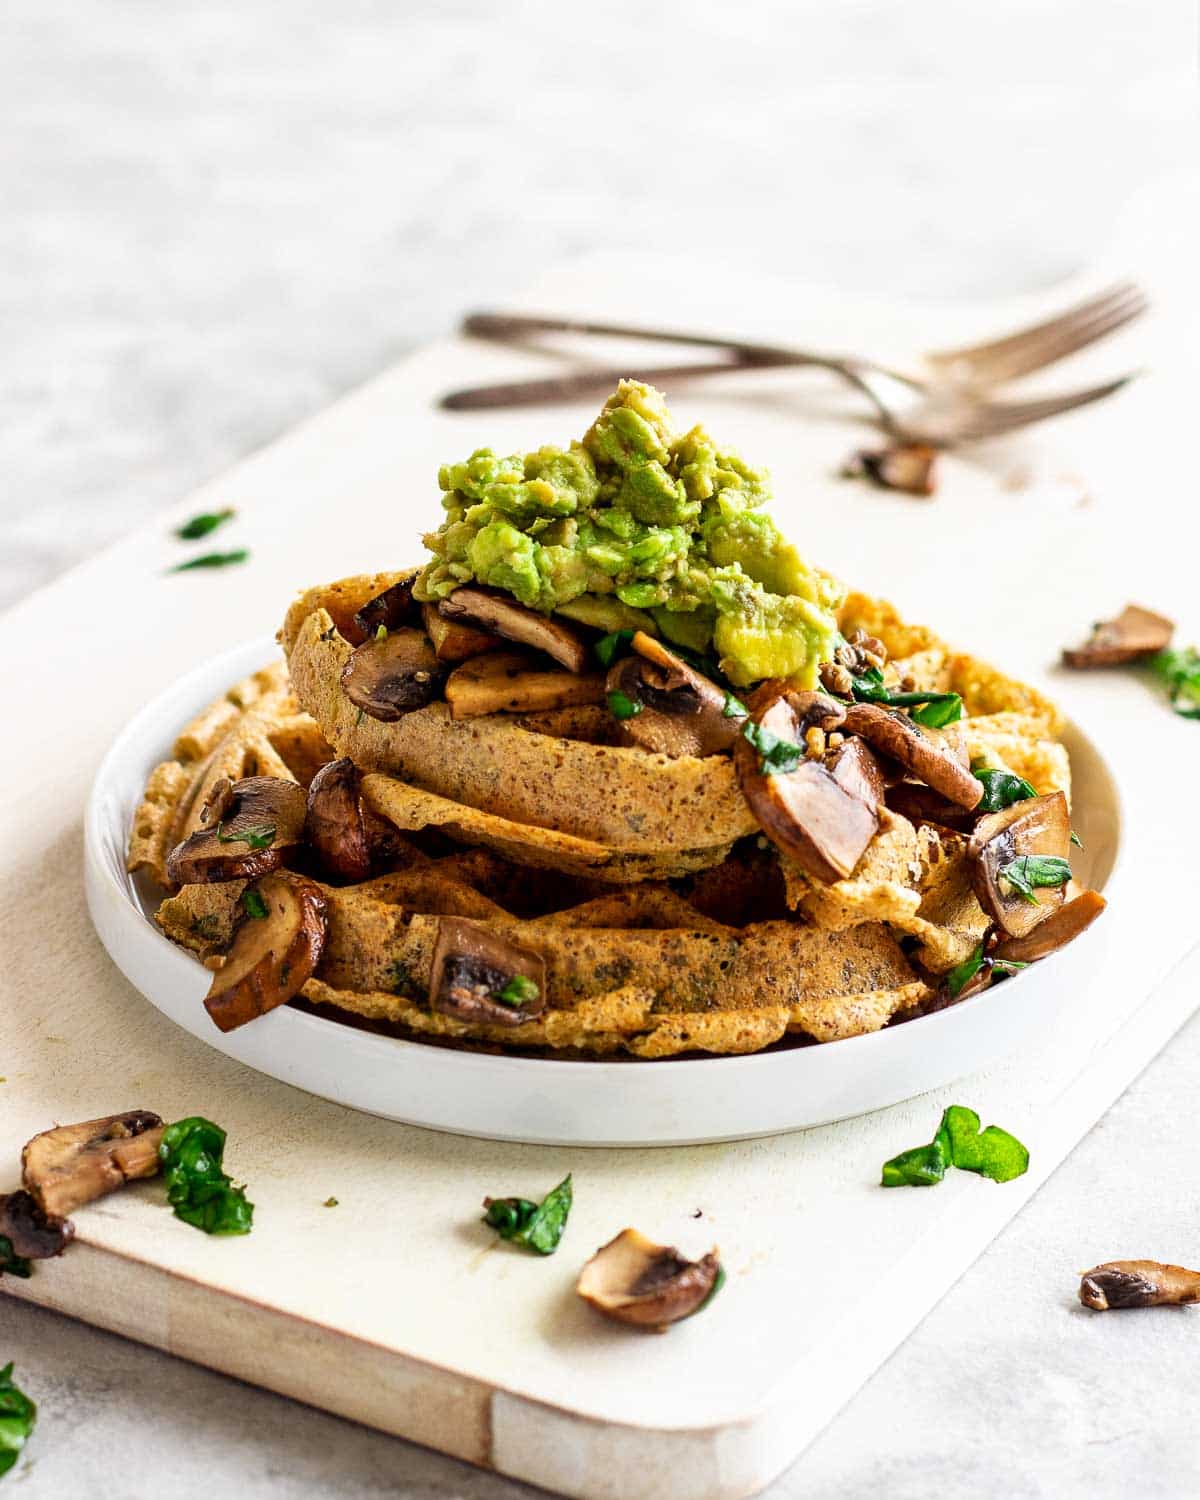 Vegan spinach waffles with mushrooms and avocado, on a white chopping board with a fork nearby.